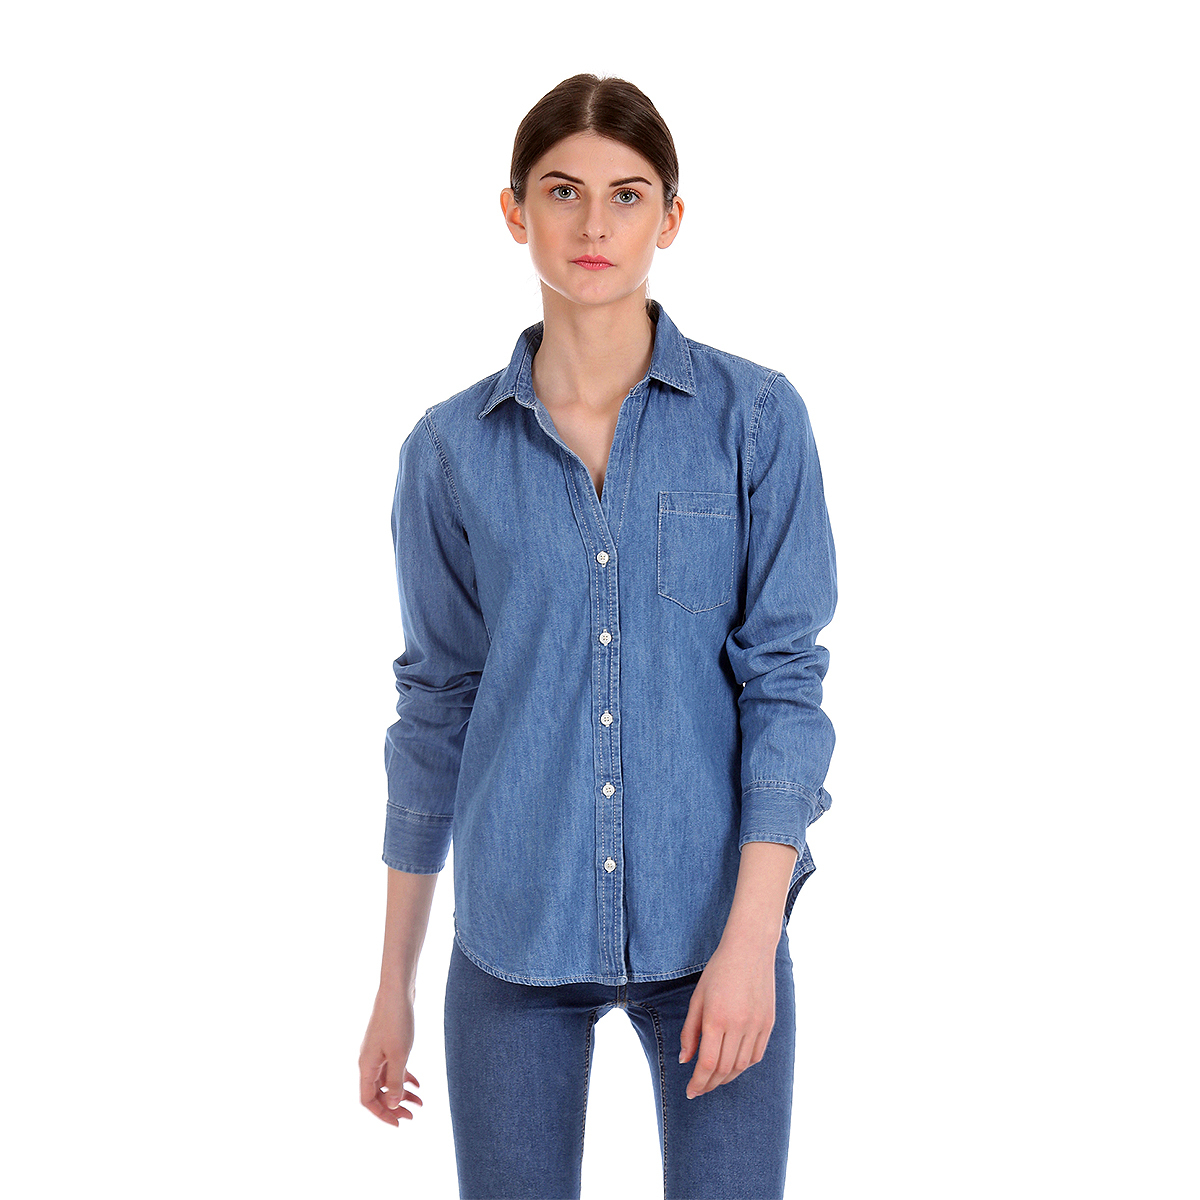 Gap Washed Regular Fit Full Sleeve Casual Shirt with Styled Button Placket & Patch Pocket - Indigo